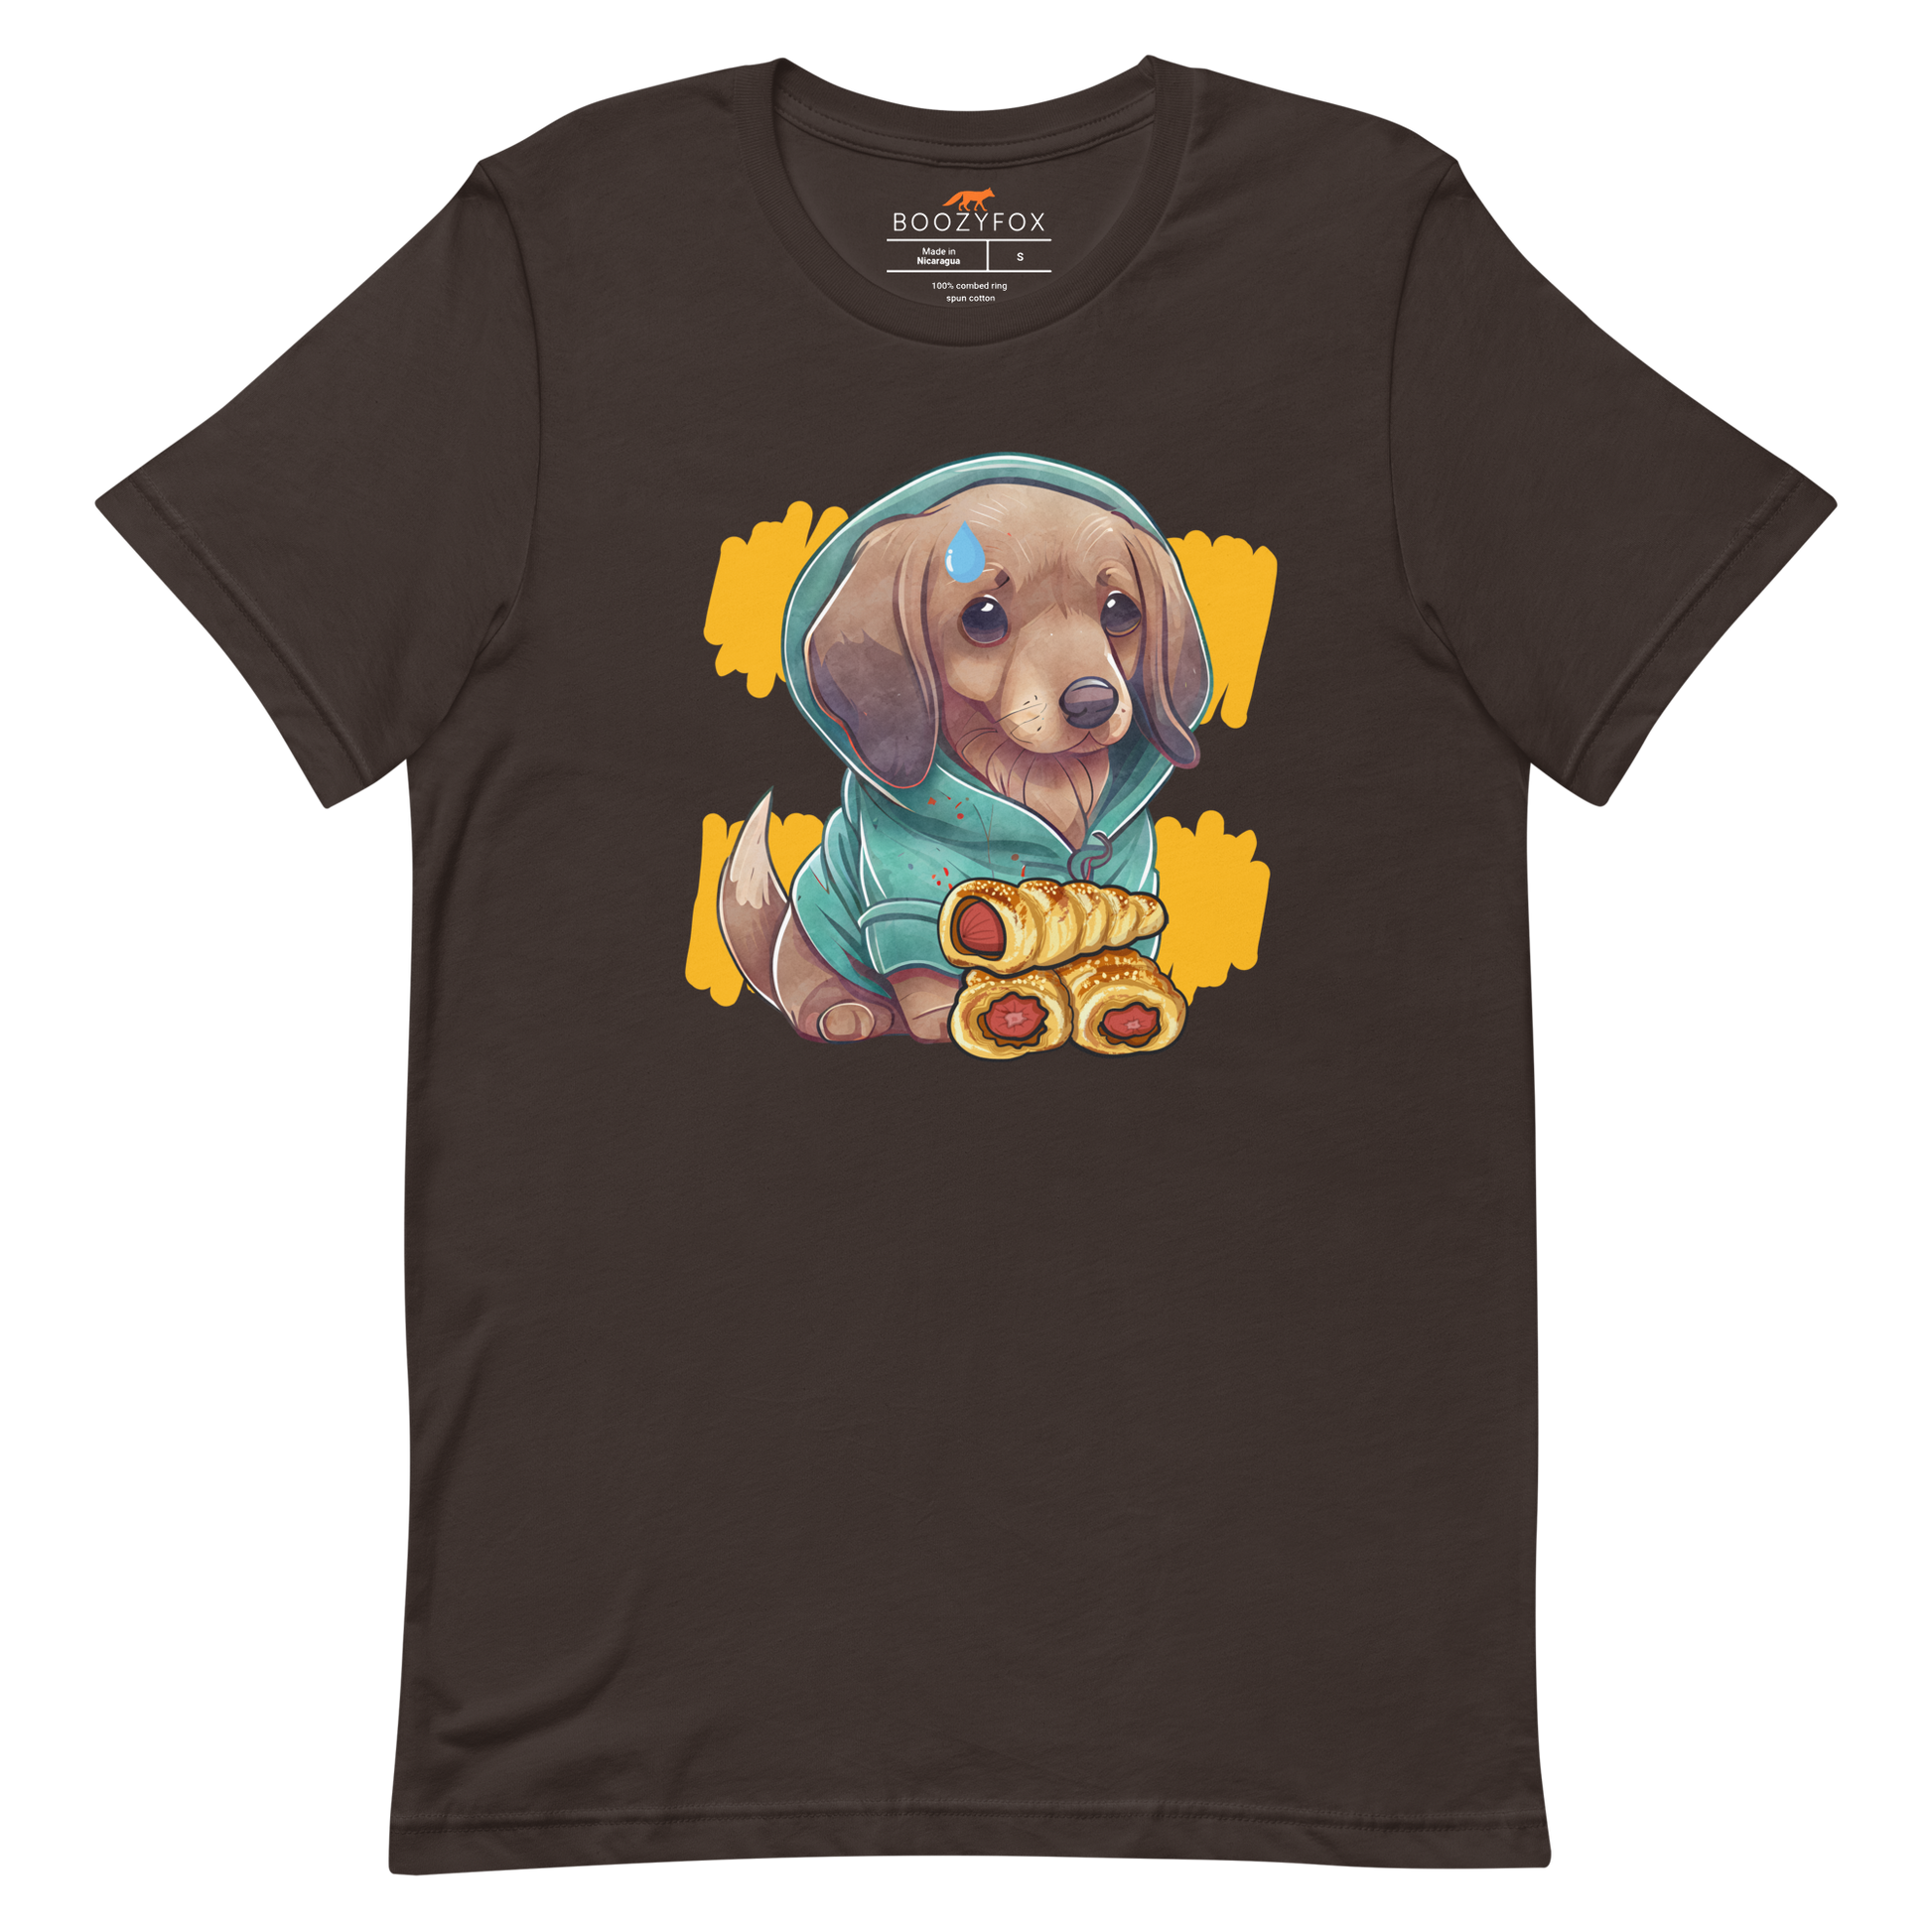 Brown Premium Sausage Dog T-Shirt featuring an adorable sausage roll dachshund graphic on the chest - Cute Graphic Dachshund  Tees - Boozy Fox